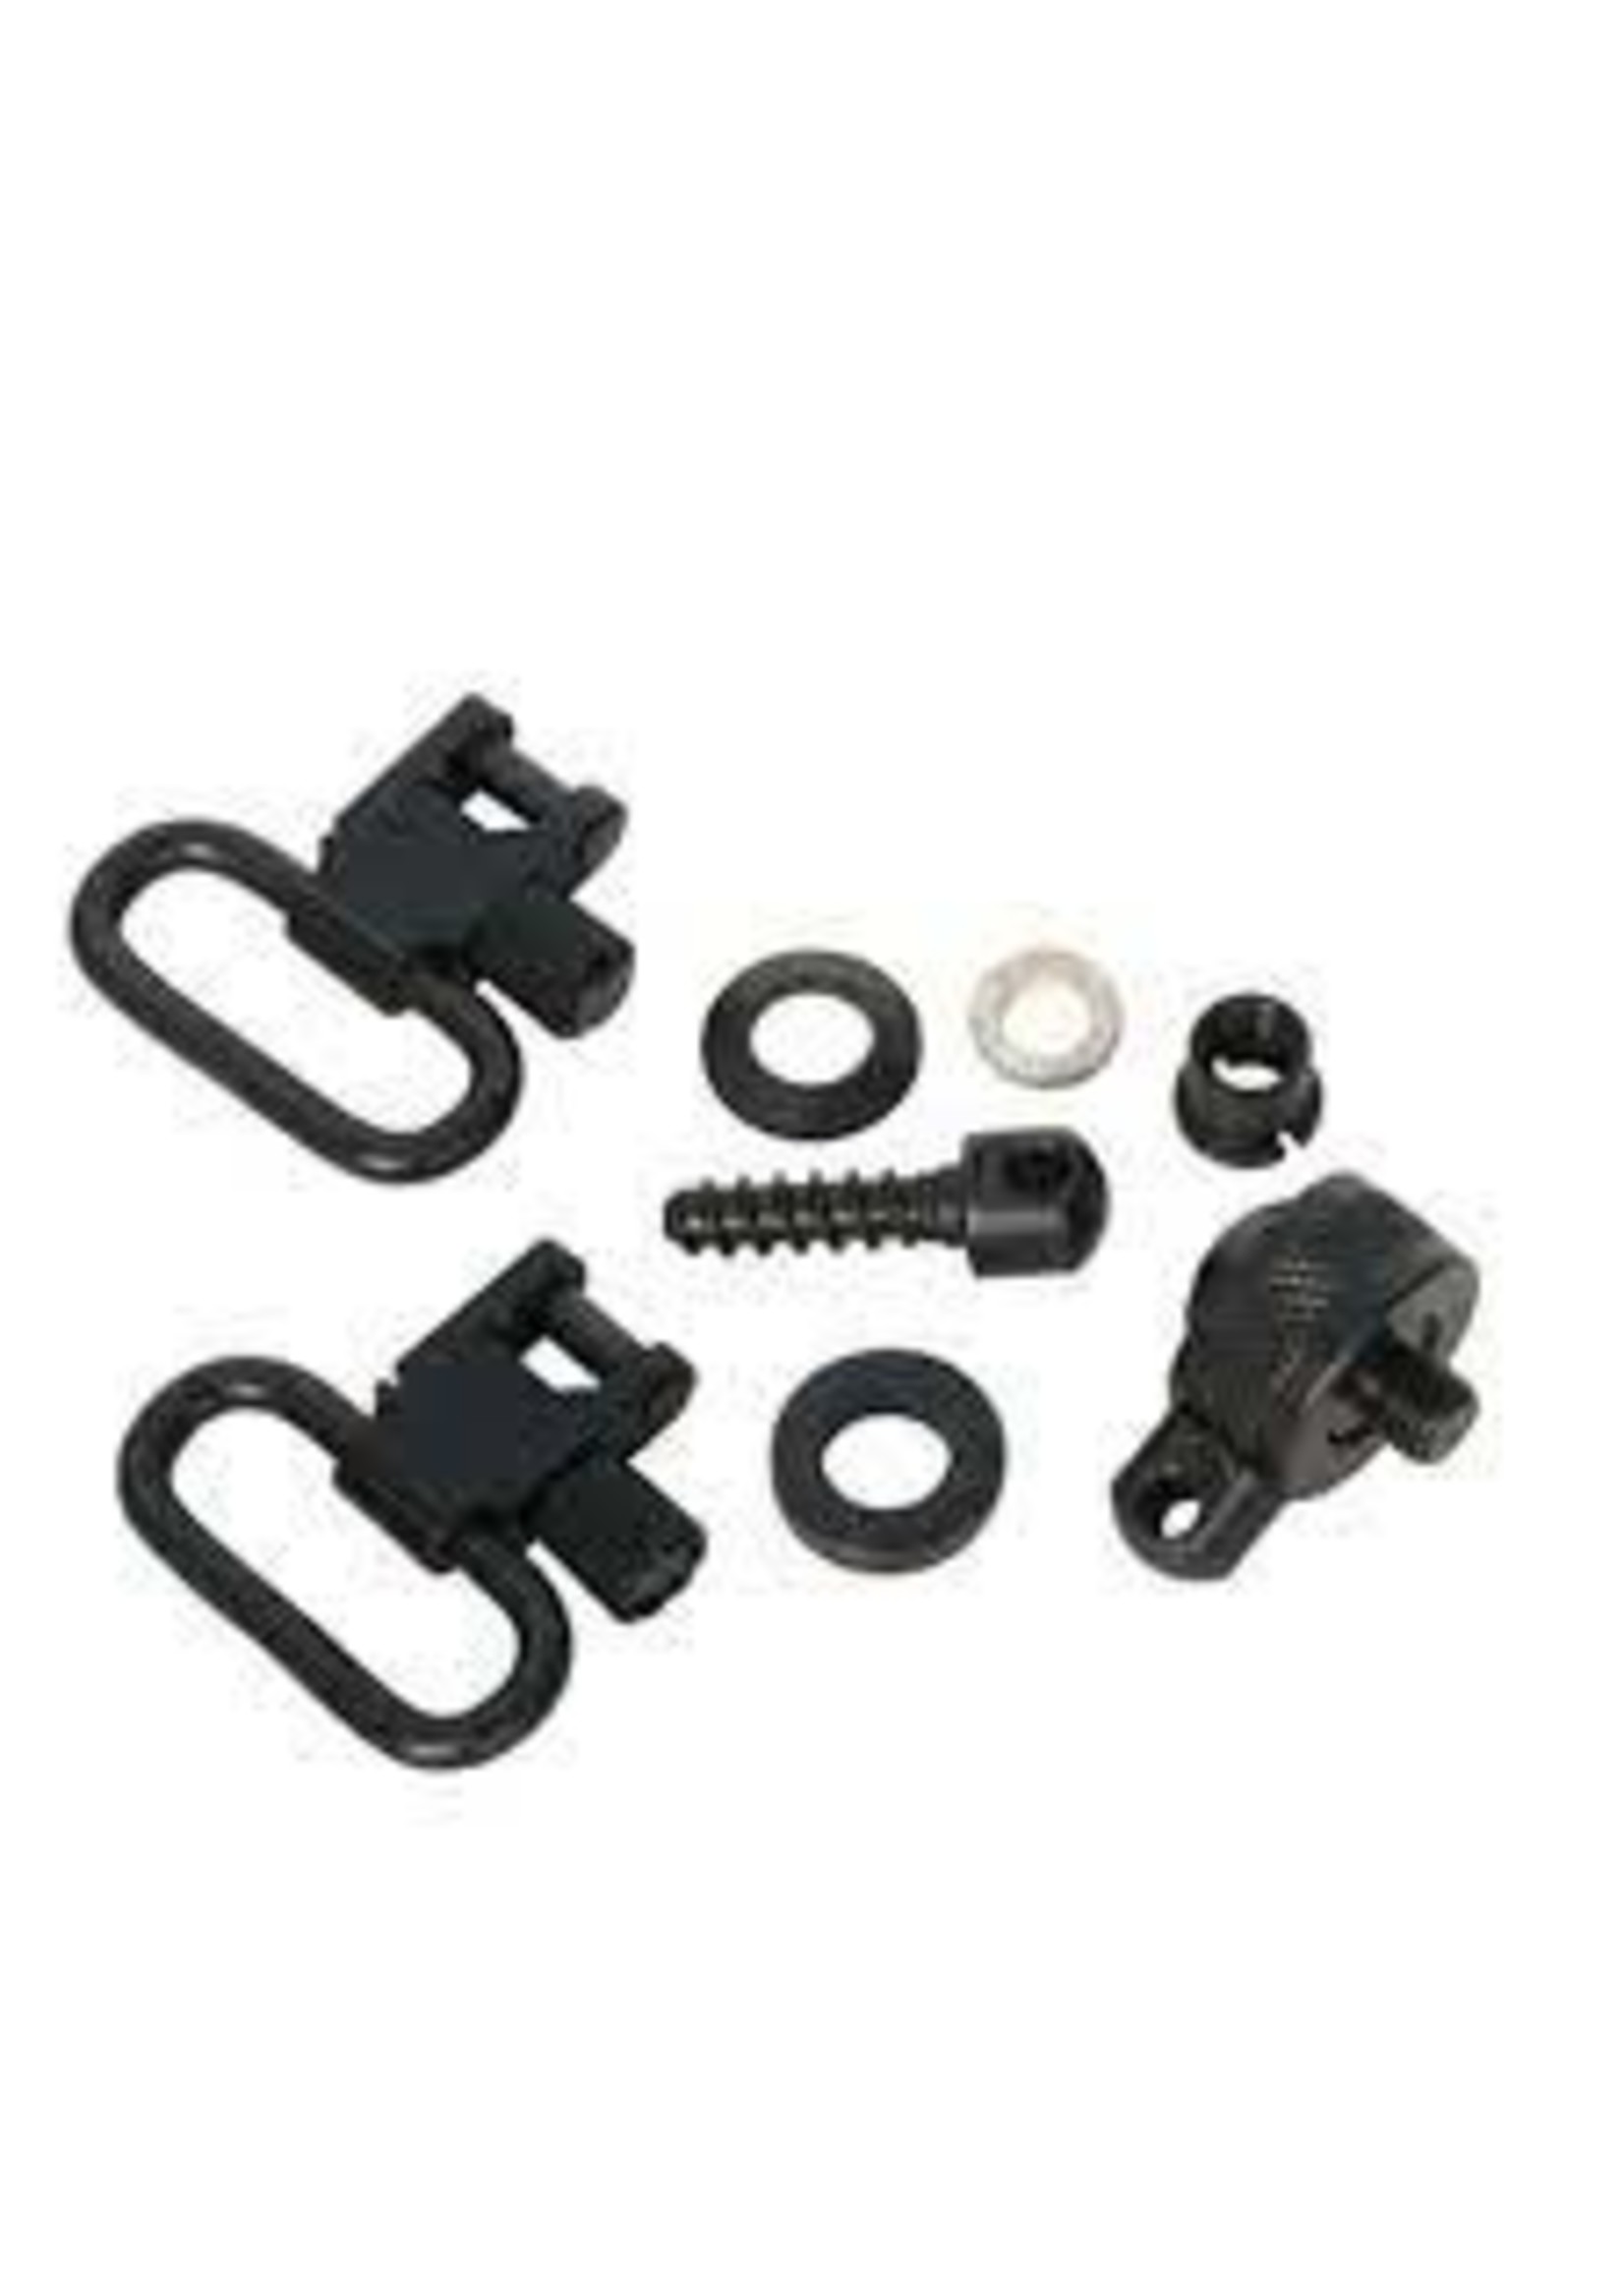 BELL OUTDOOR PRODUCTS BELL DETACHABLE SWIVEL SET 1" FITS 12GA MOSSBERG 500